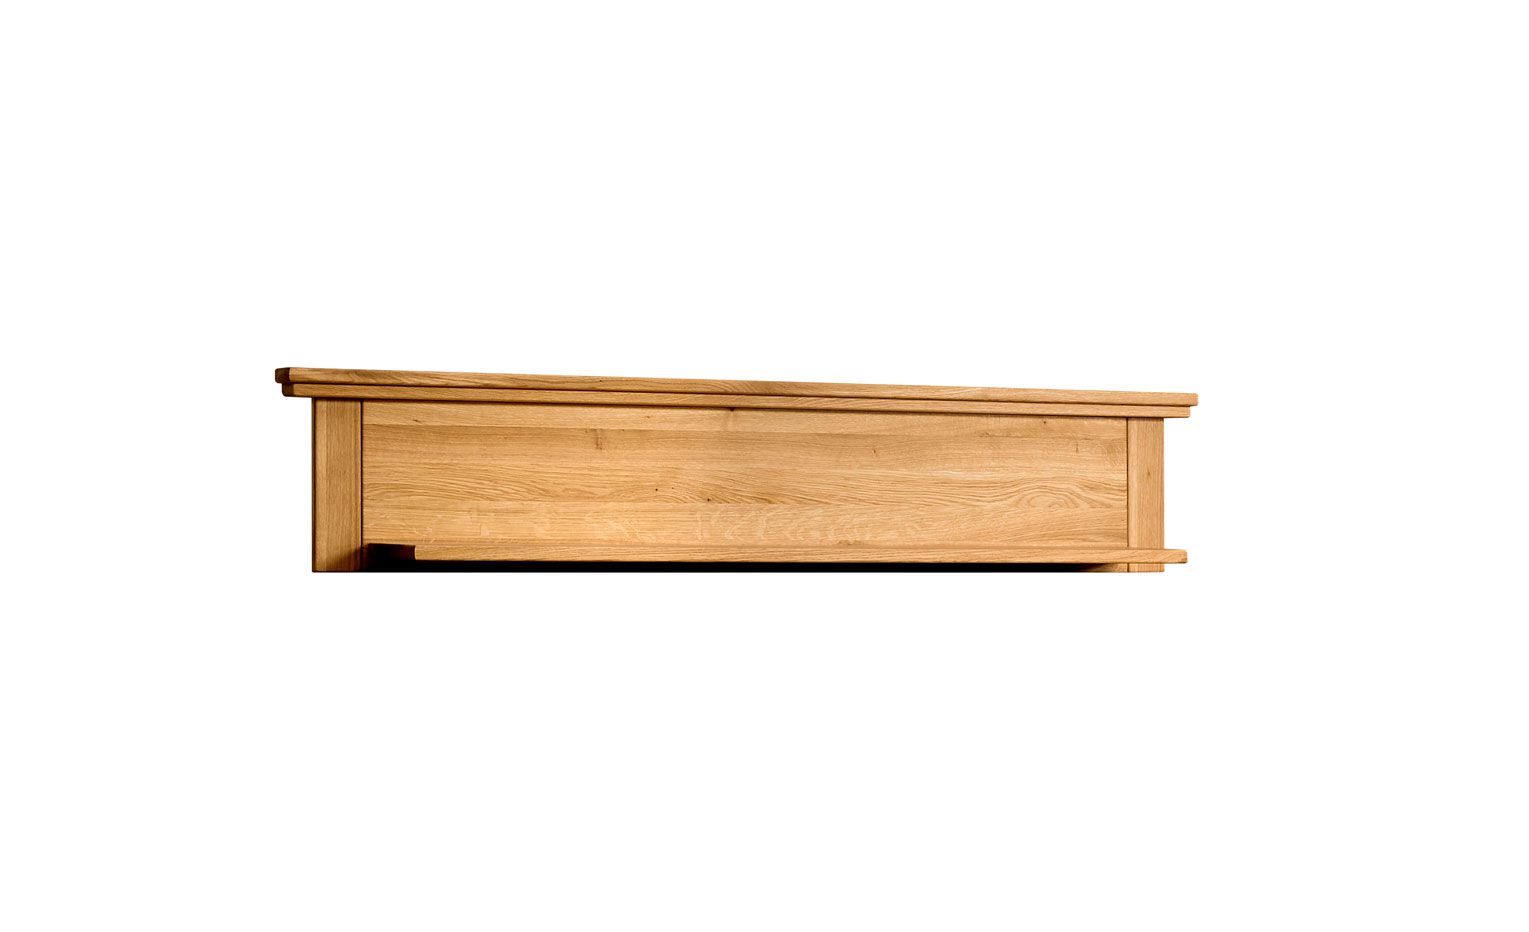 Hanging shelf / wall shelf with one shelf Floresta 20, natural, waxed / oiled / brushed, solid oak, with lively grain, 29 x 142 x 24 cm, modern and simple design